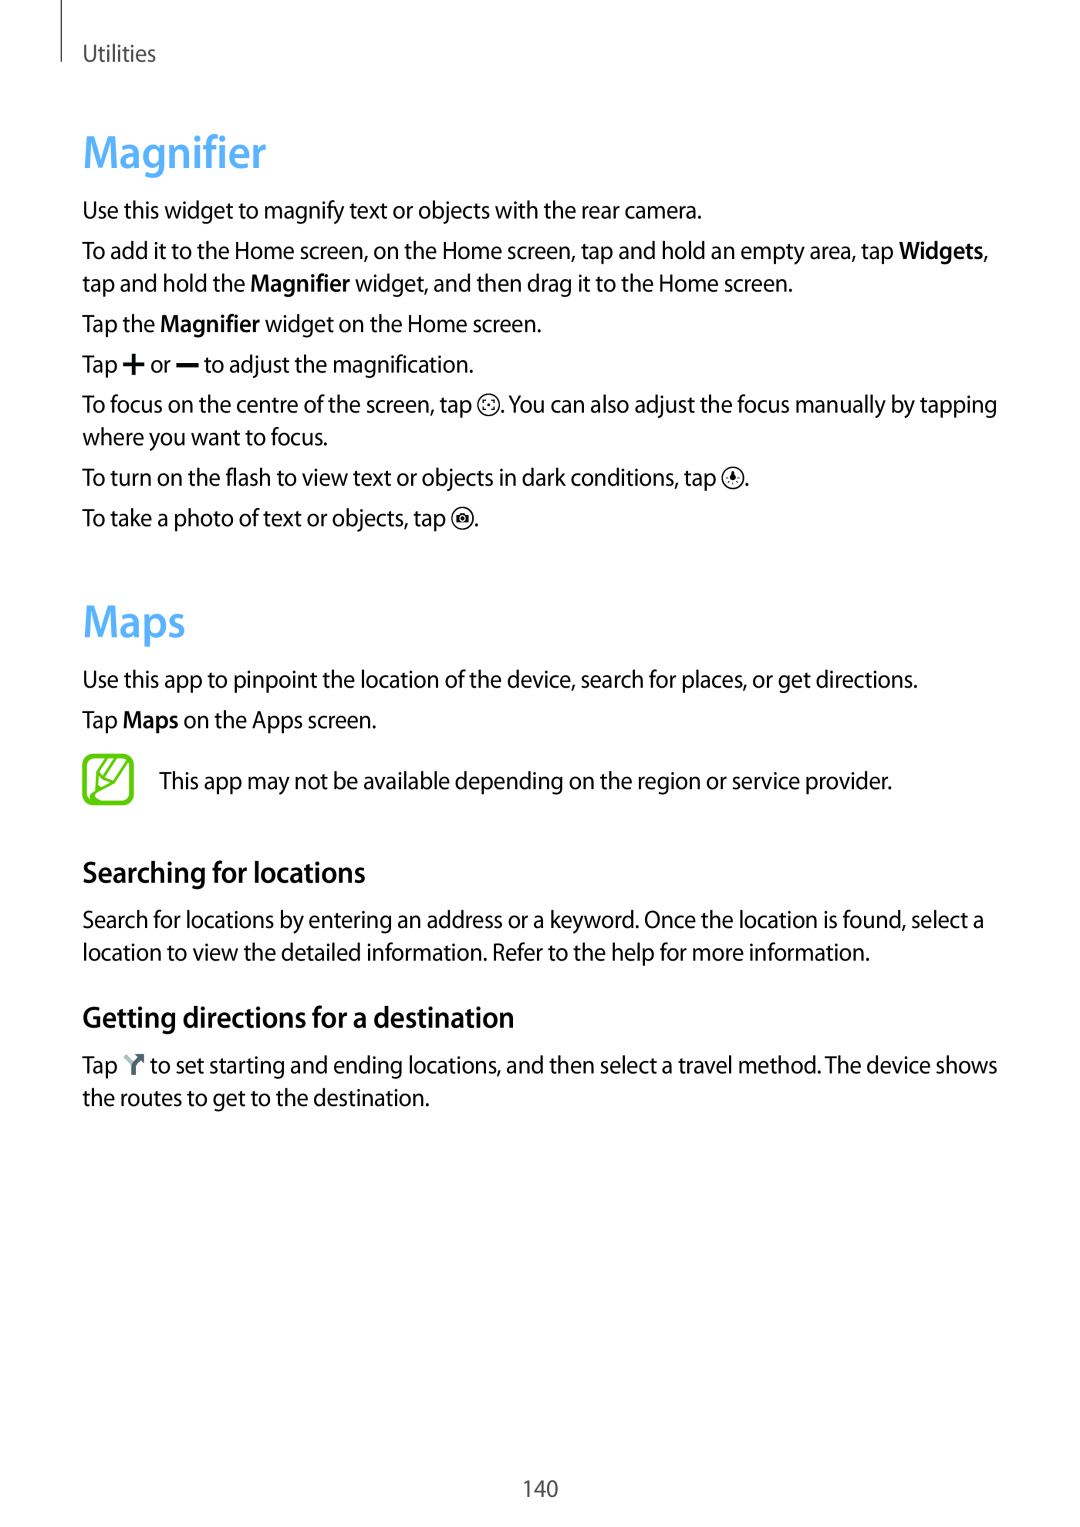 Samsung SM-G901FZKACOS manual Magnifier, Maps, Searching for locations, Getting directions for a destination, Utilities 